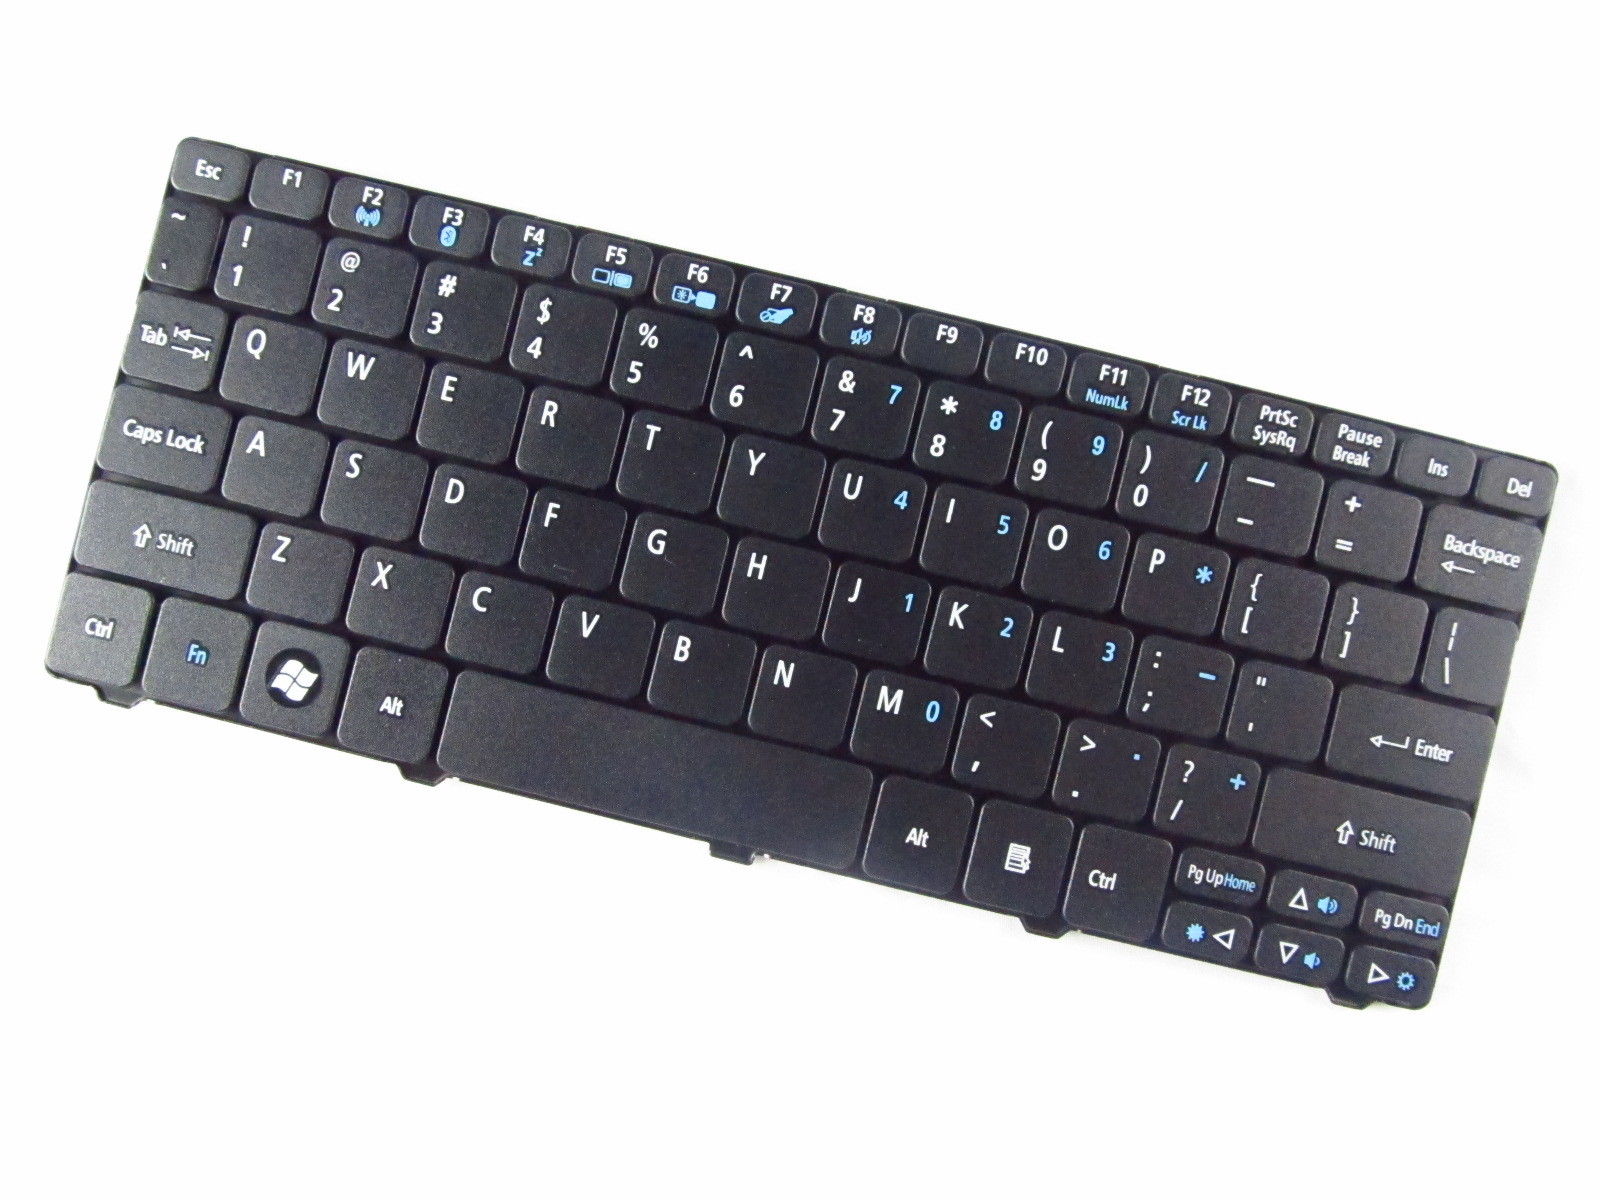 Dell Laptop Keyboard Repair/replacement in chennai